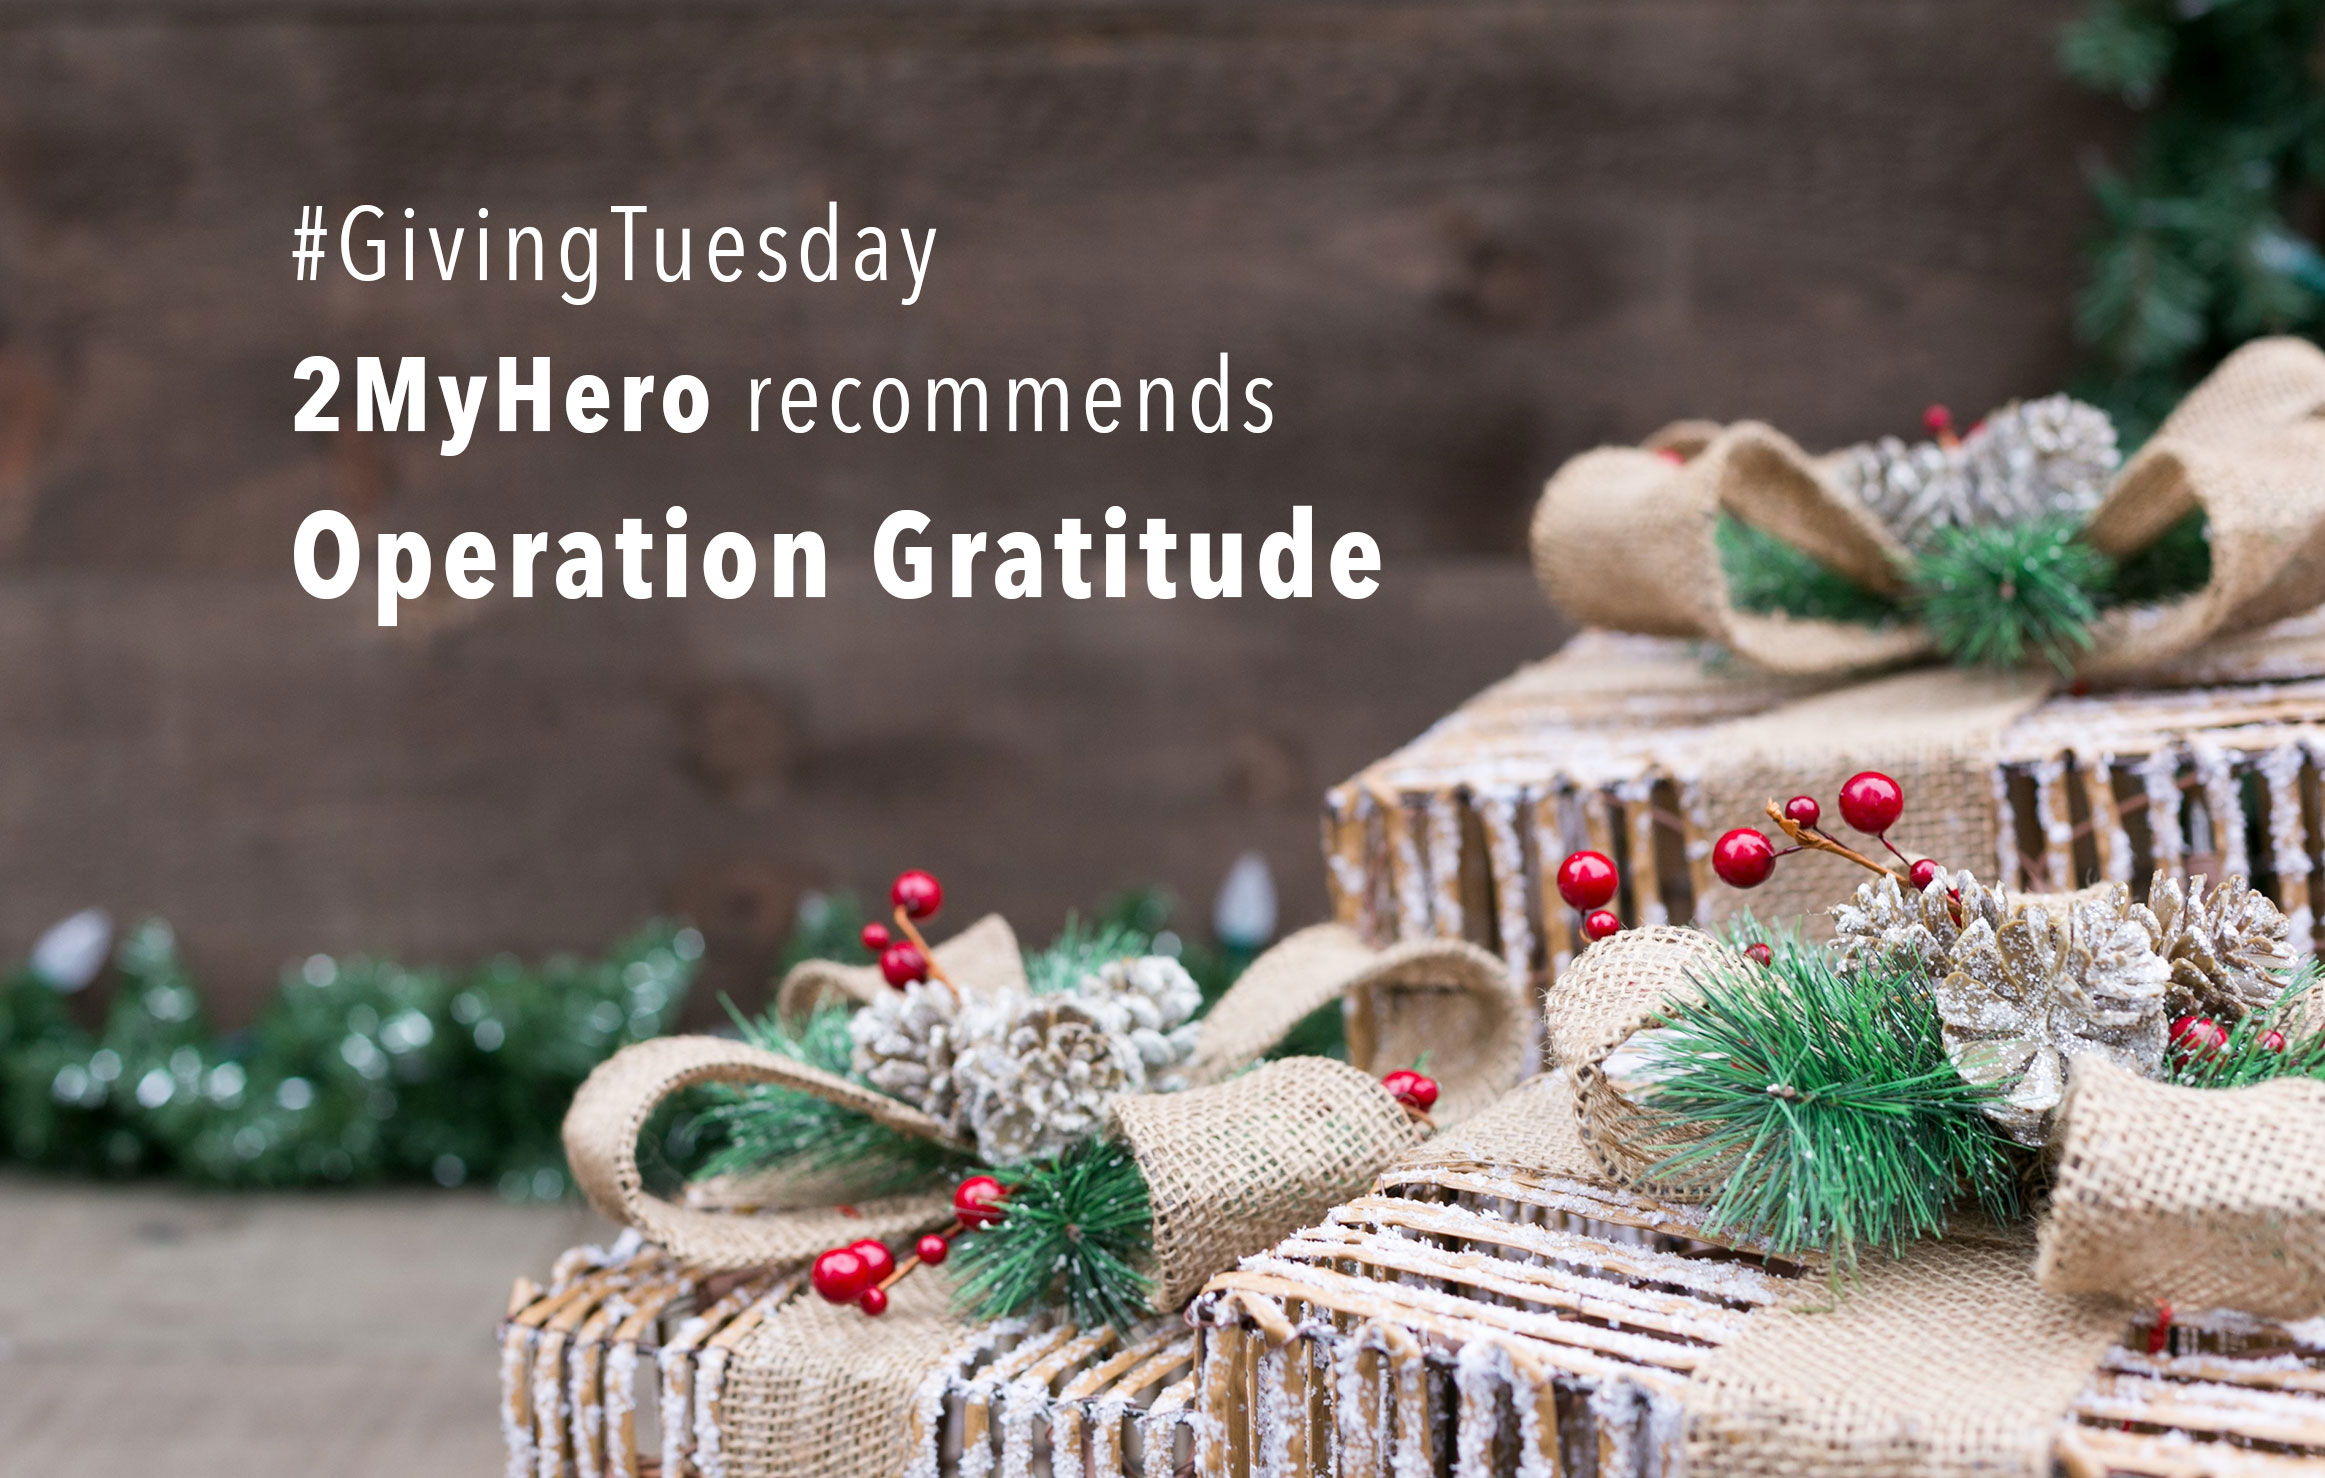 2MyHero military greeting cards recommendation for #givingTuesday 2018